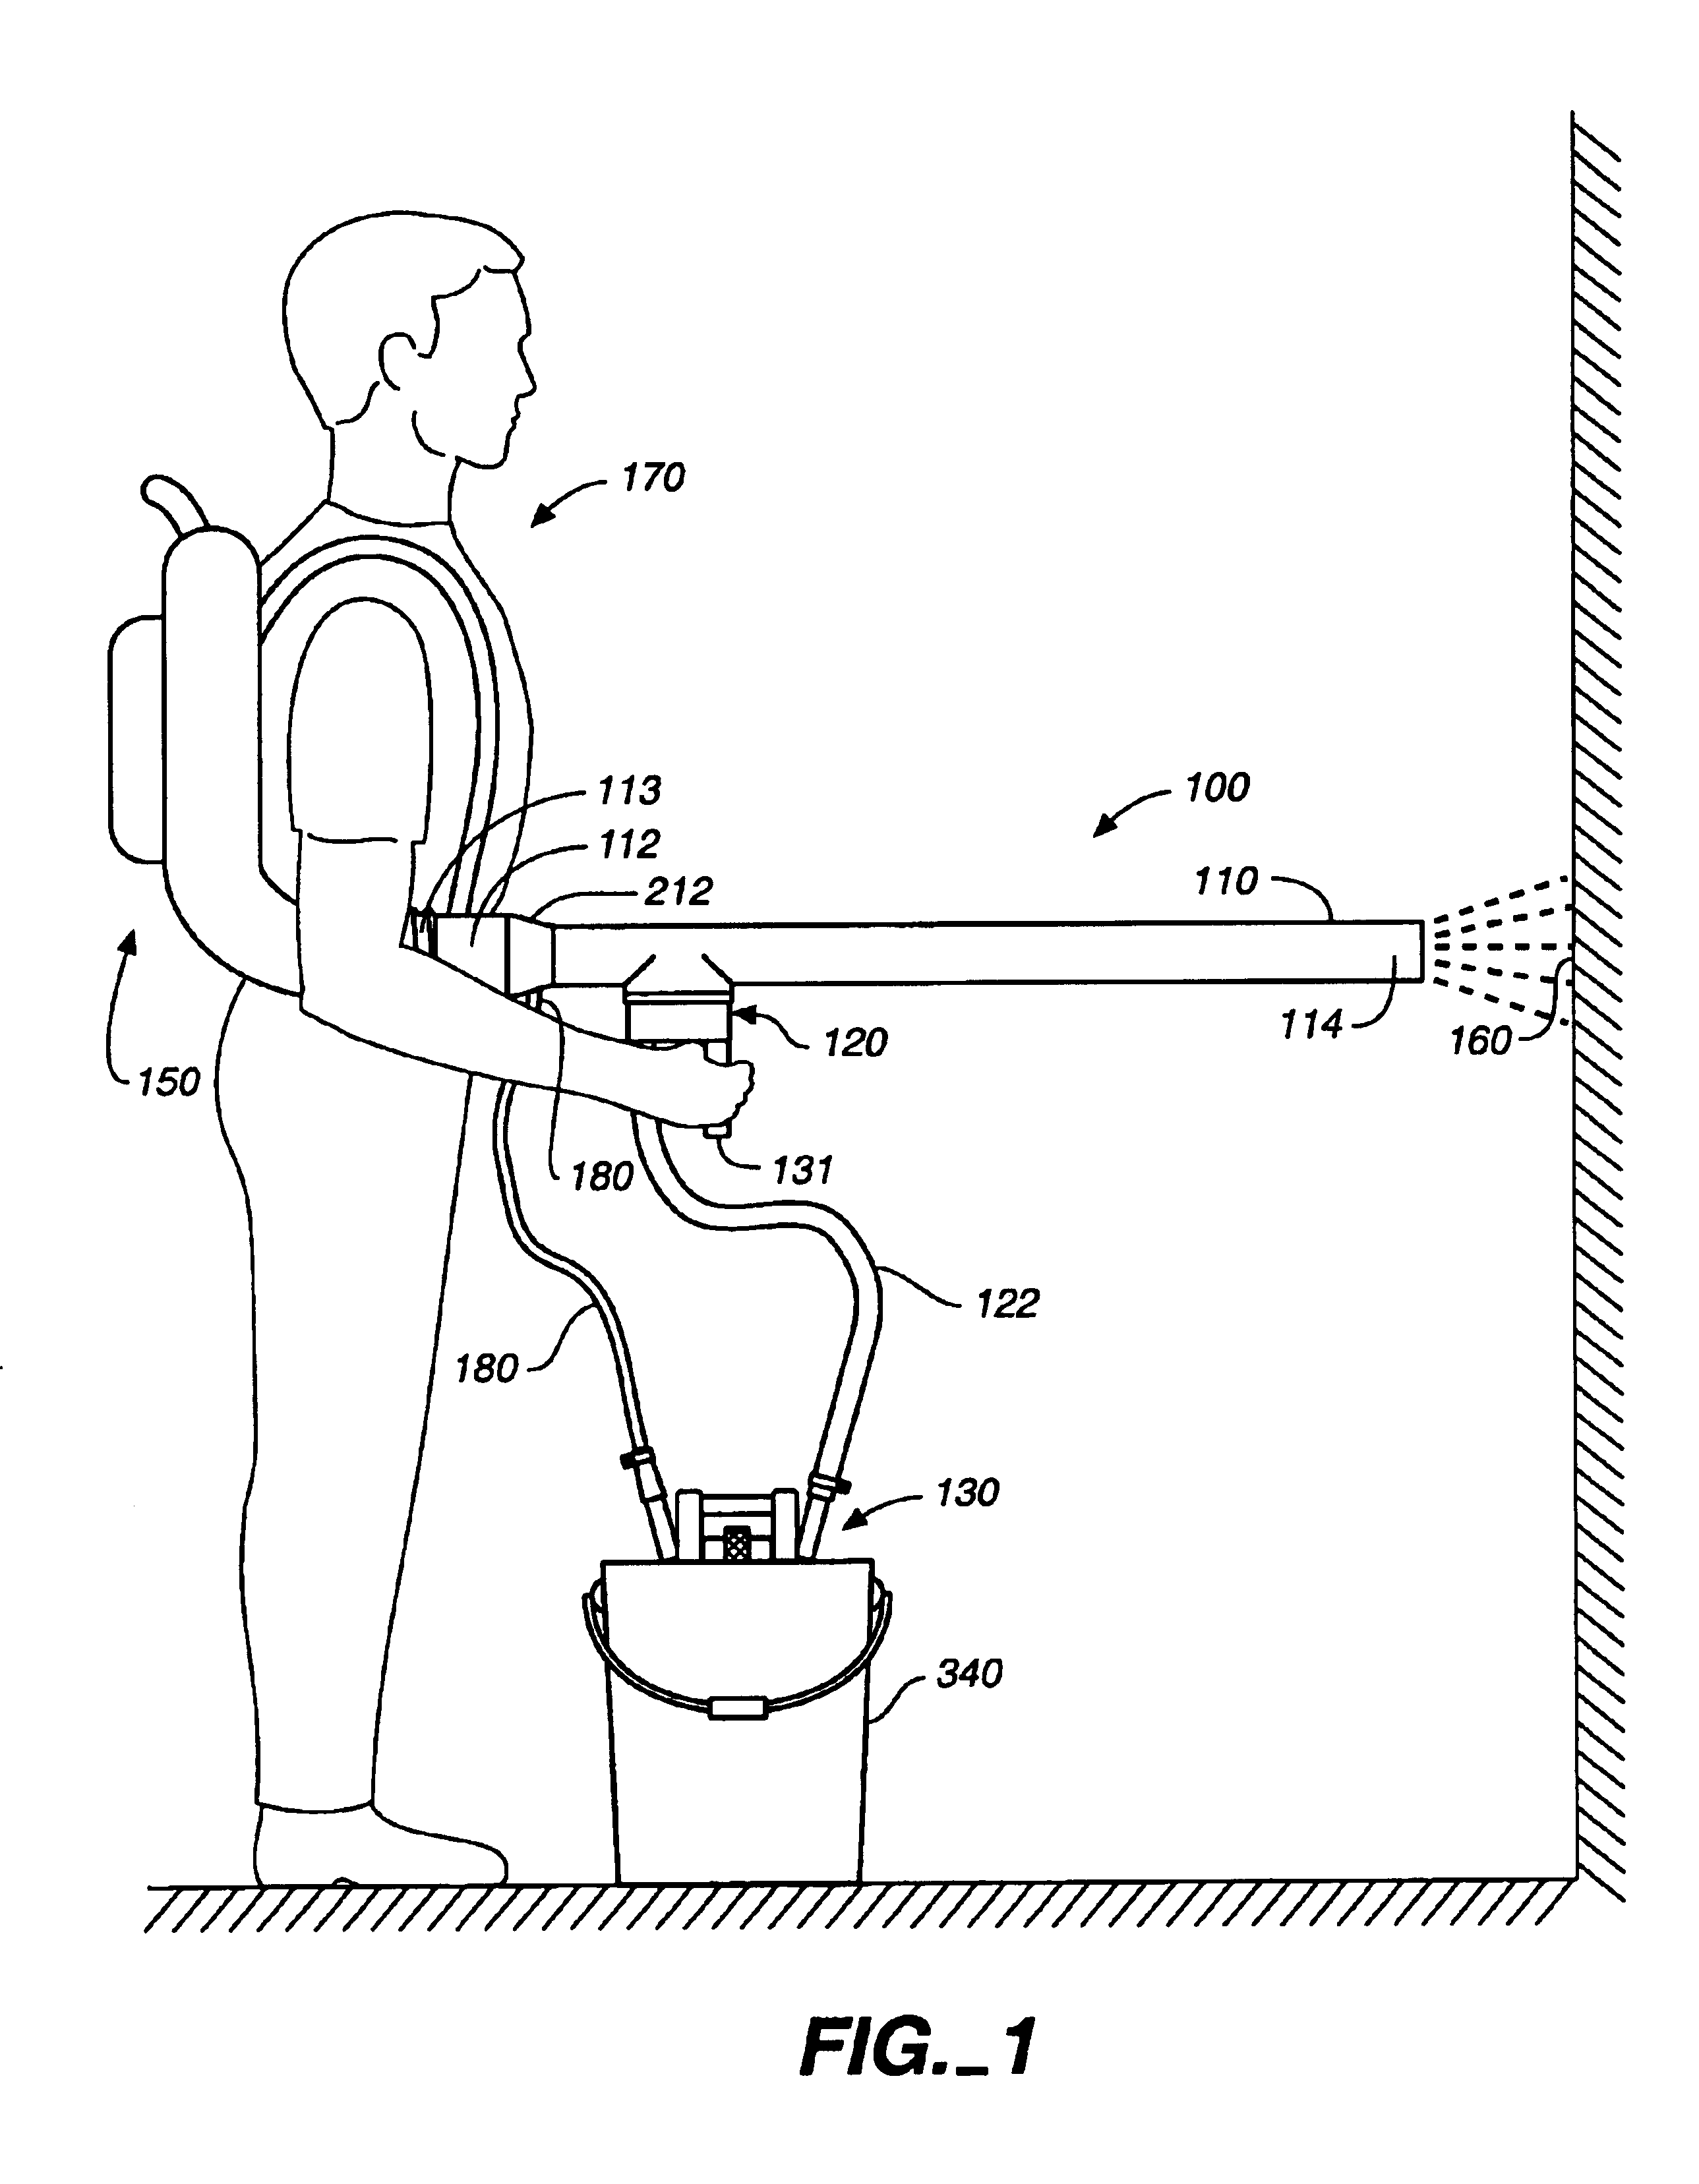 Particulate blaster assembly and aspirator